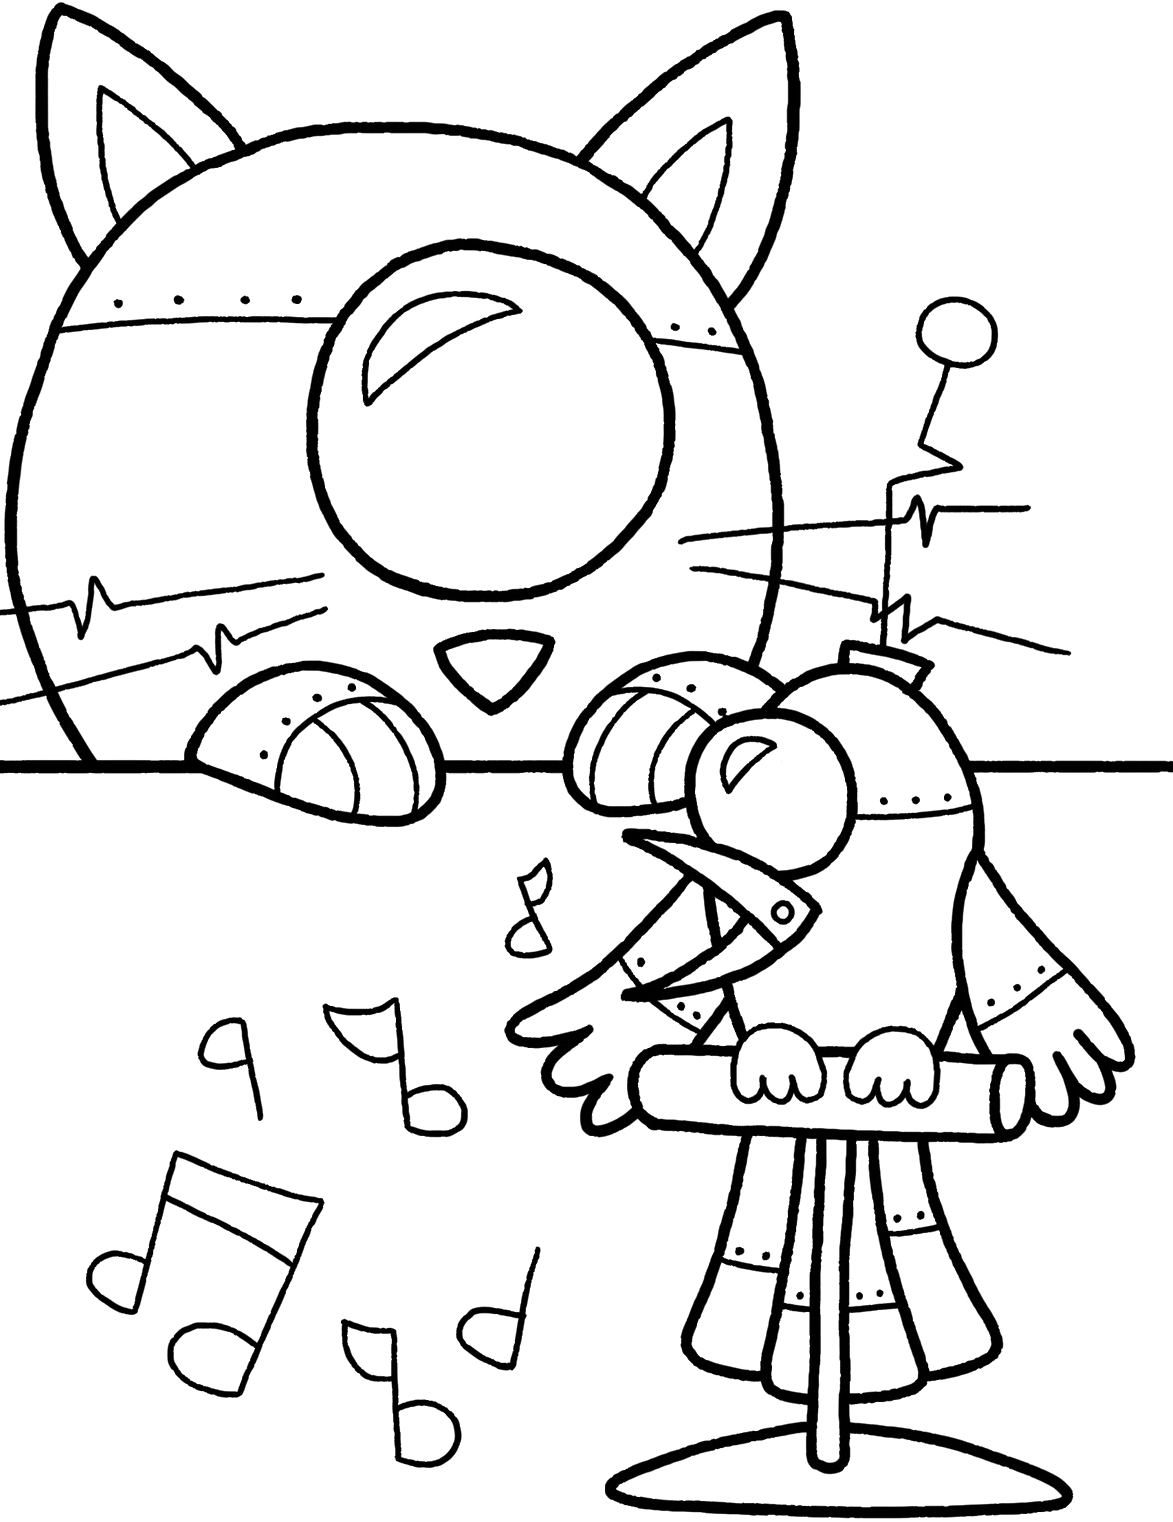 Machine Dog And Bird Coloring Page